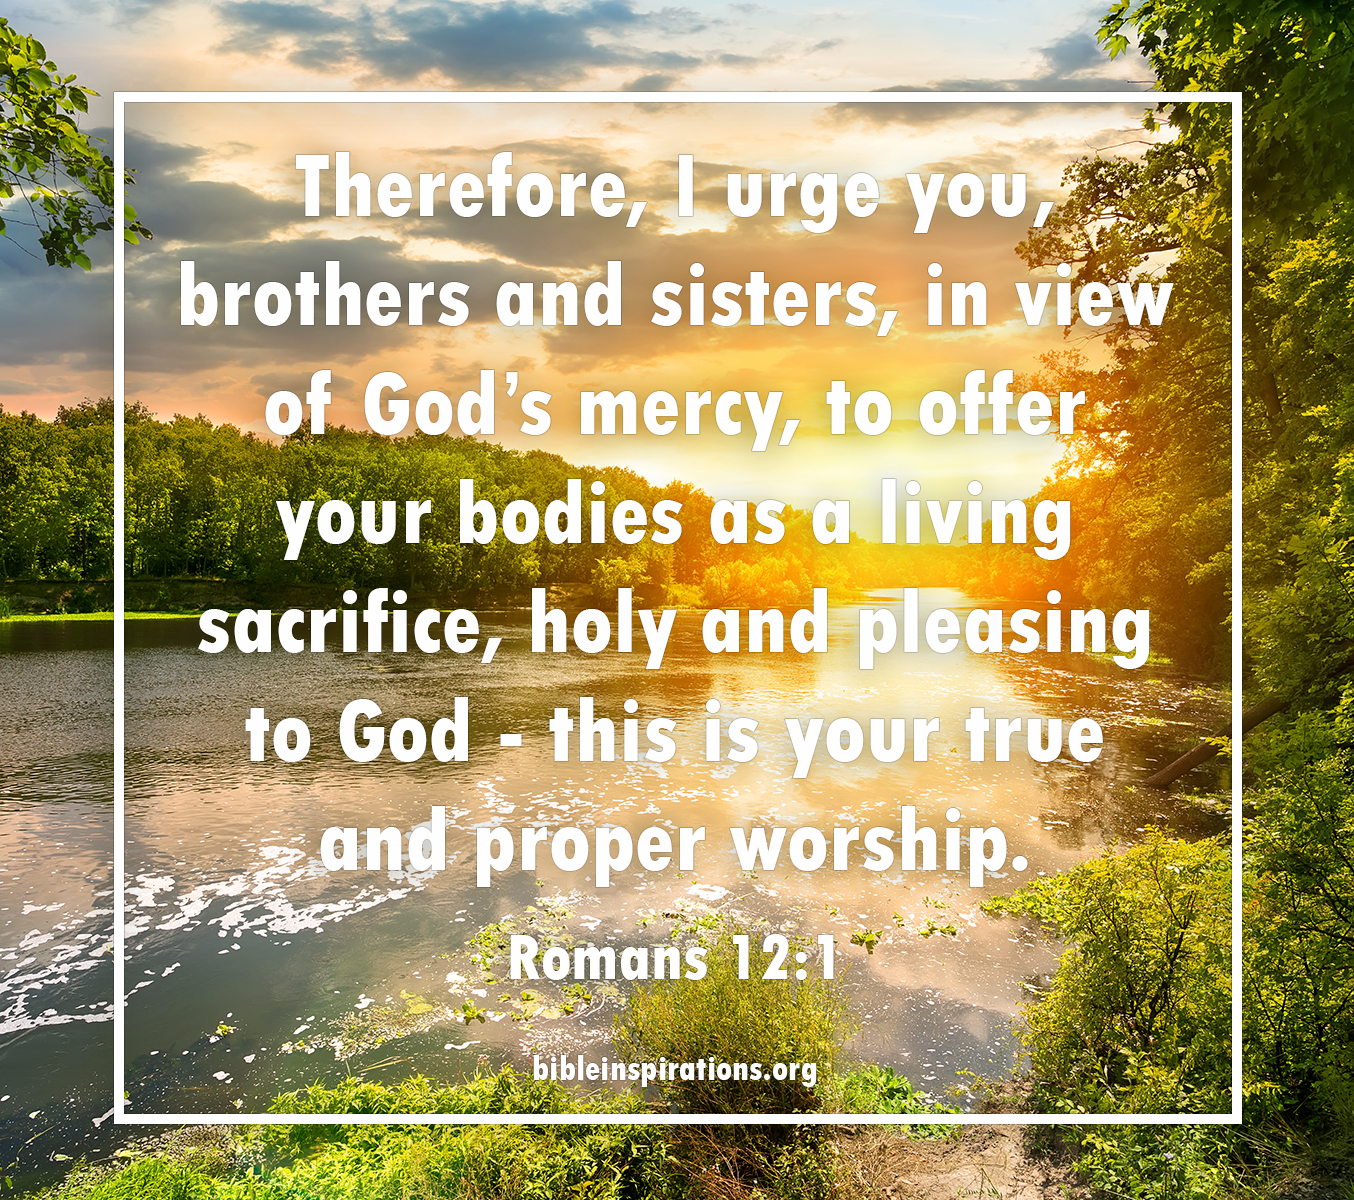 Therefore, I urge you, brothers and sisters, in view of God’s mercy, to offer your bodies as a living sacrifice, holy and pleasing to God - this is your true and proper worship. - Romans 12:1